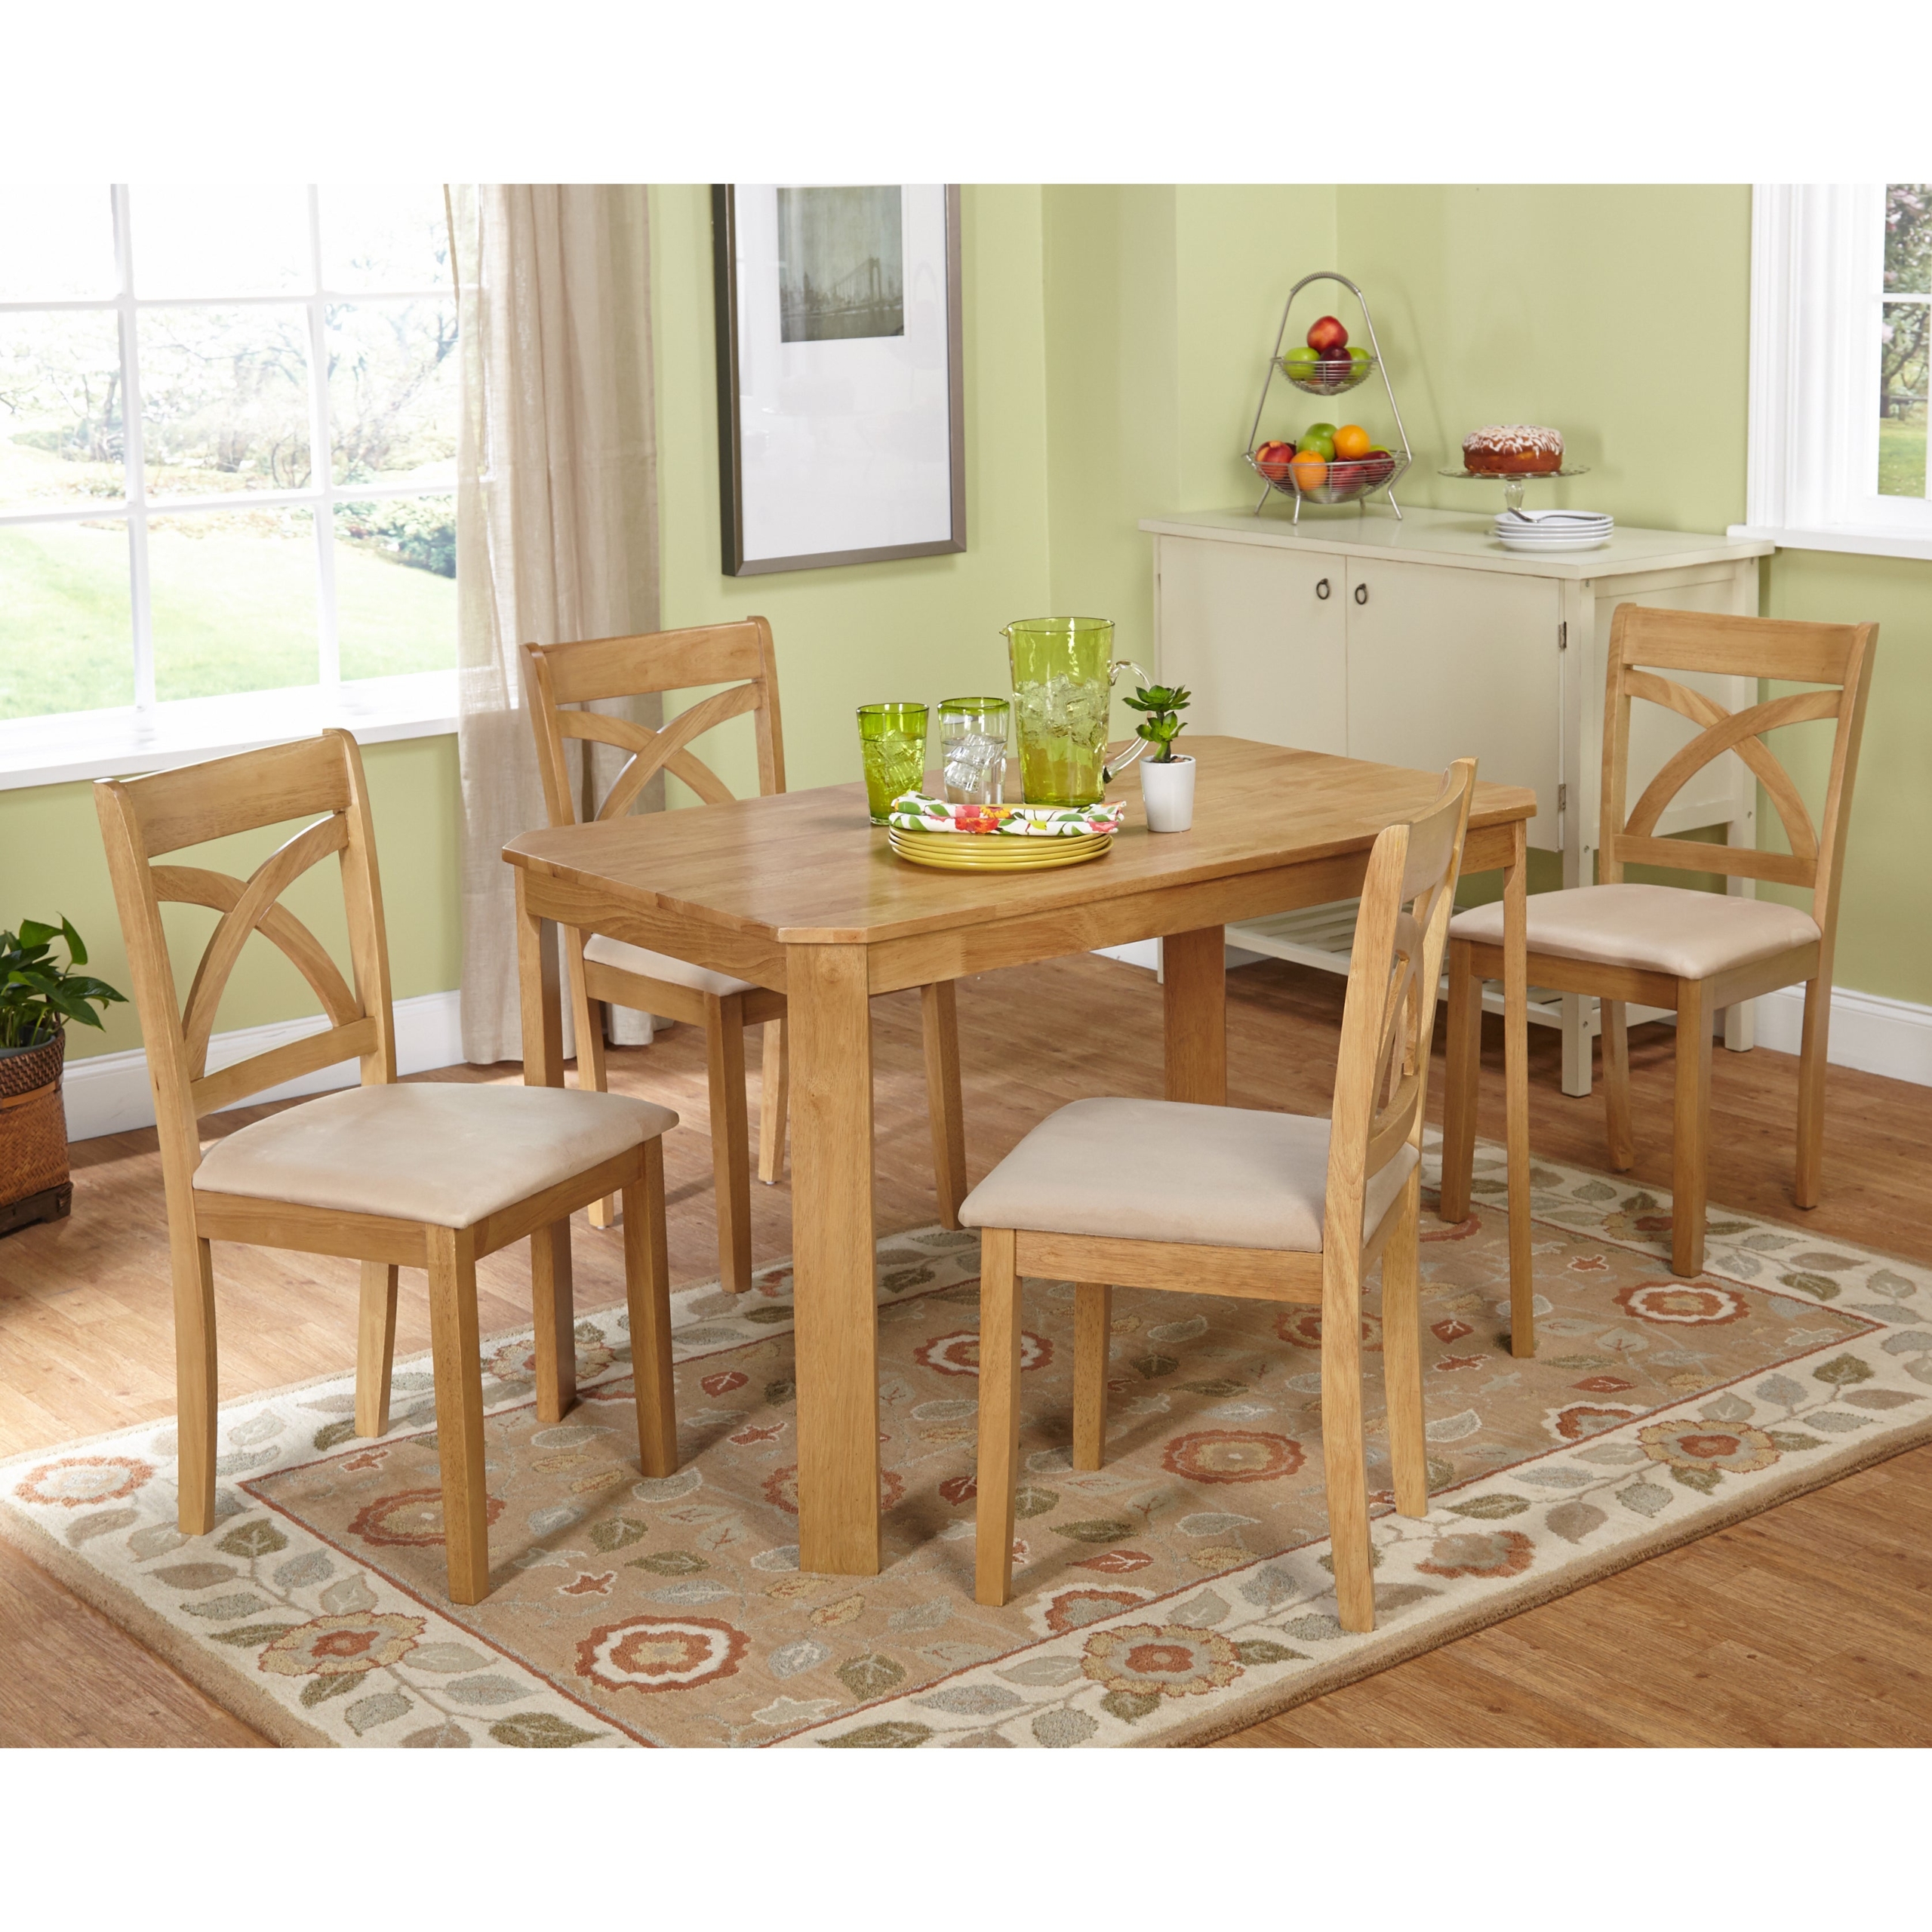 Cavendish 5 Piece Dining Set Includes Dining Table and 4 Upholstered Chairs